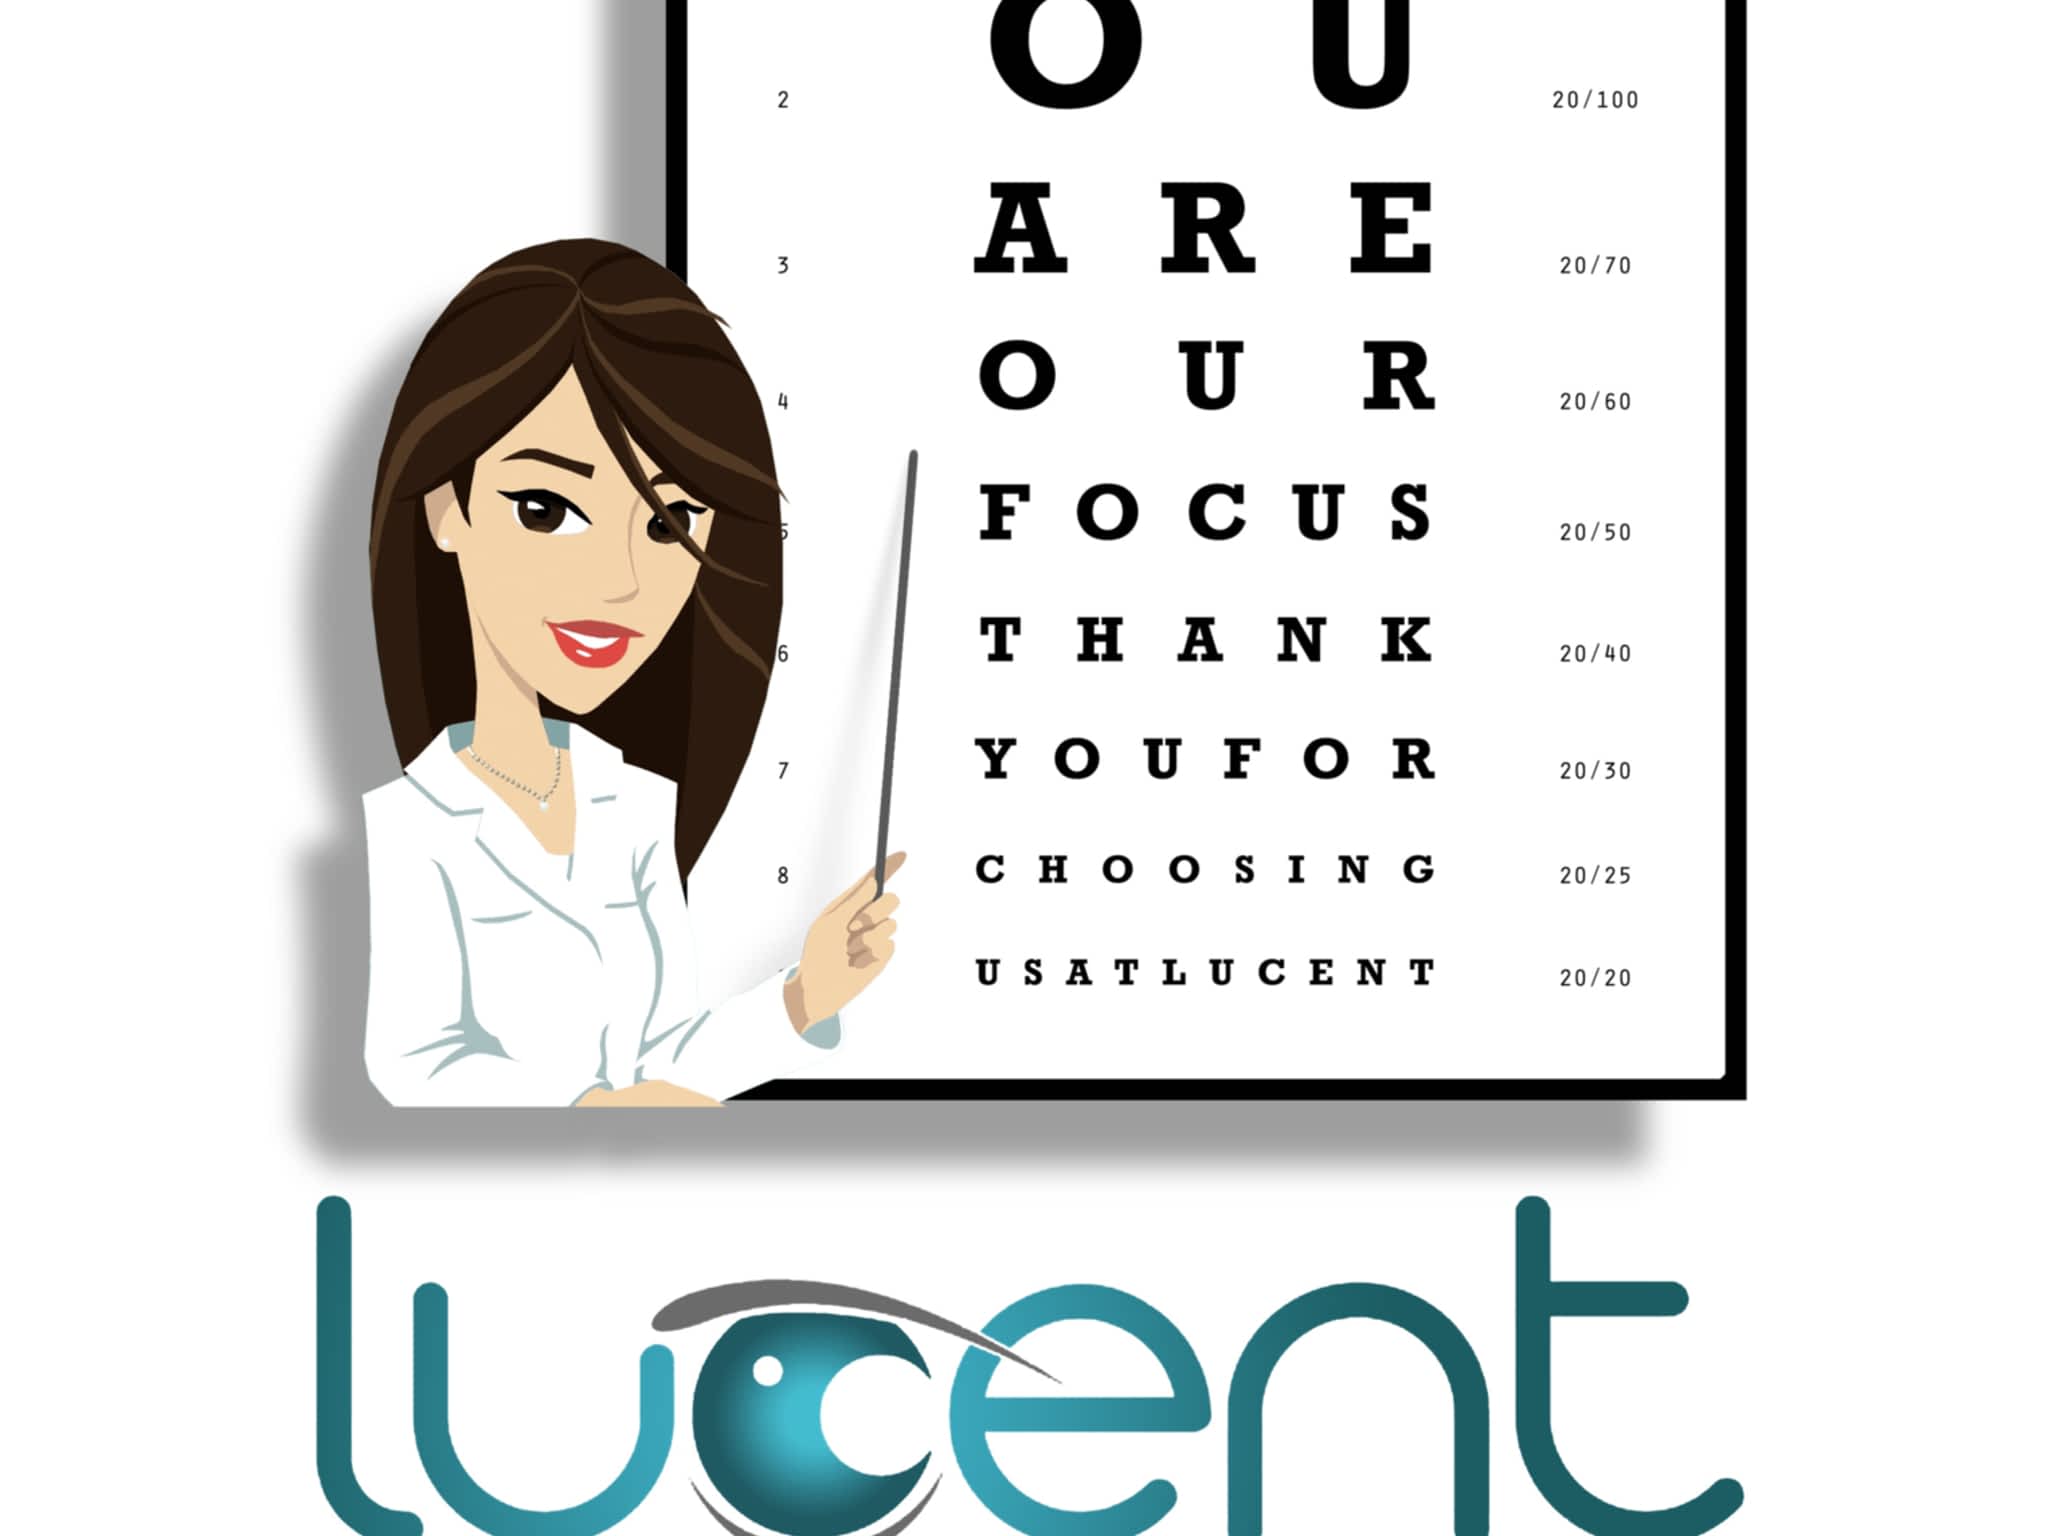 photo Lucent Family Eye Care